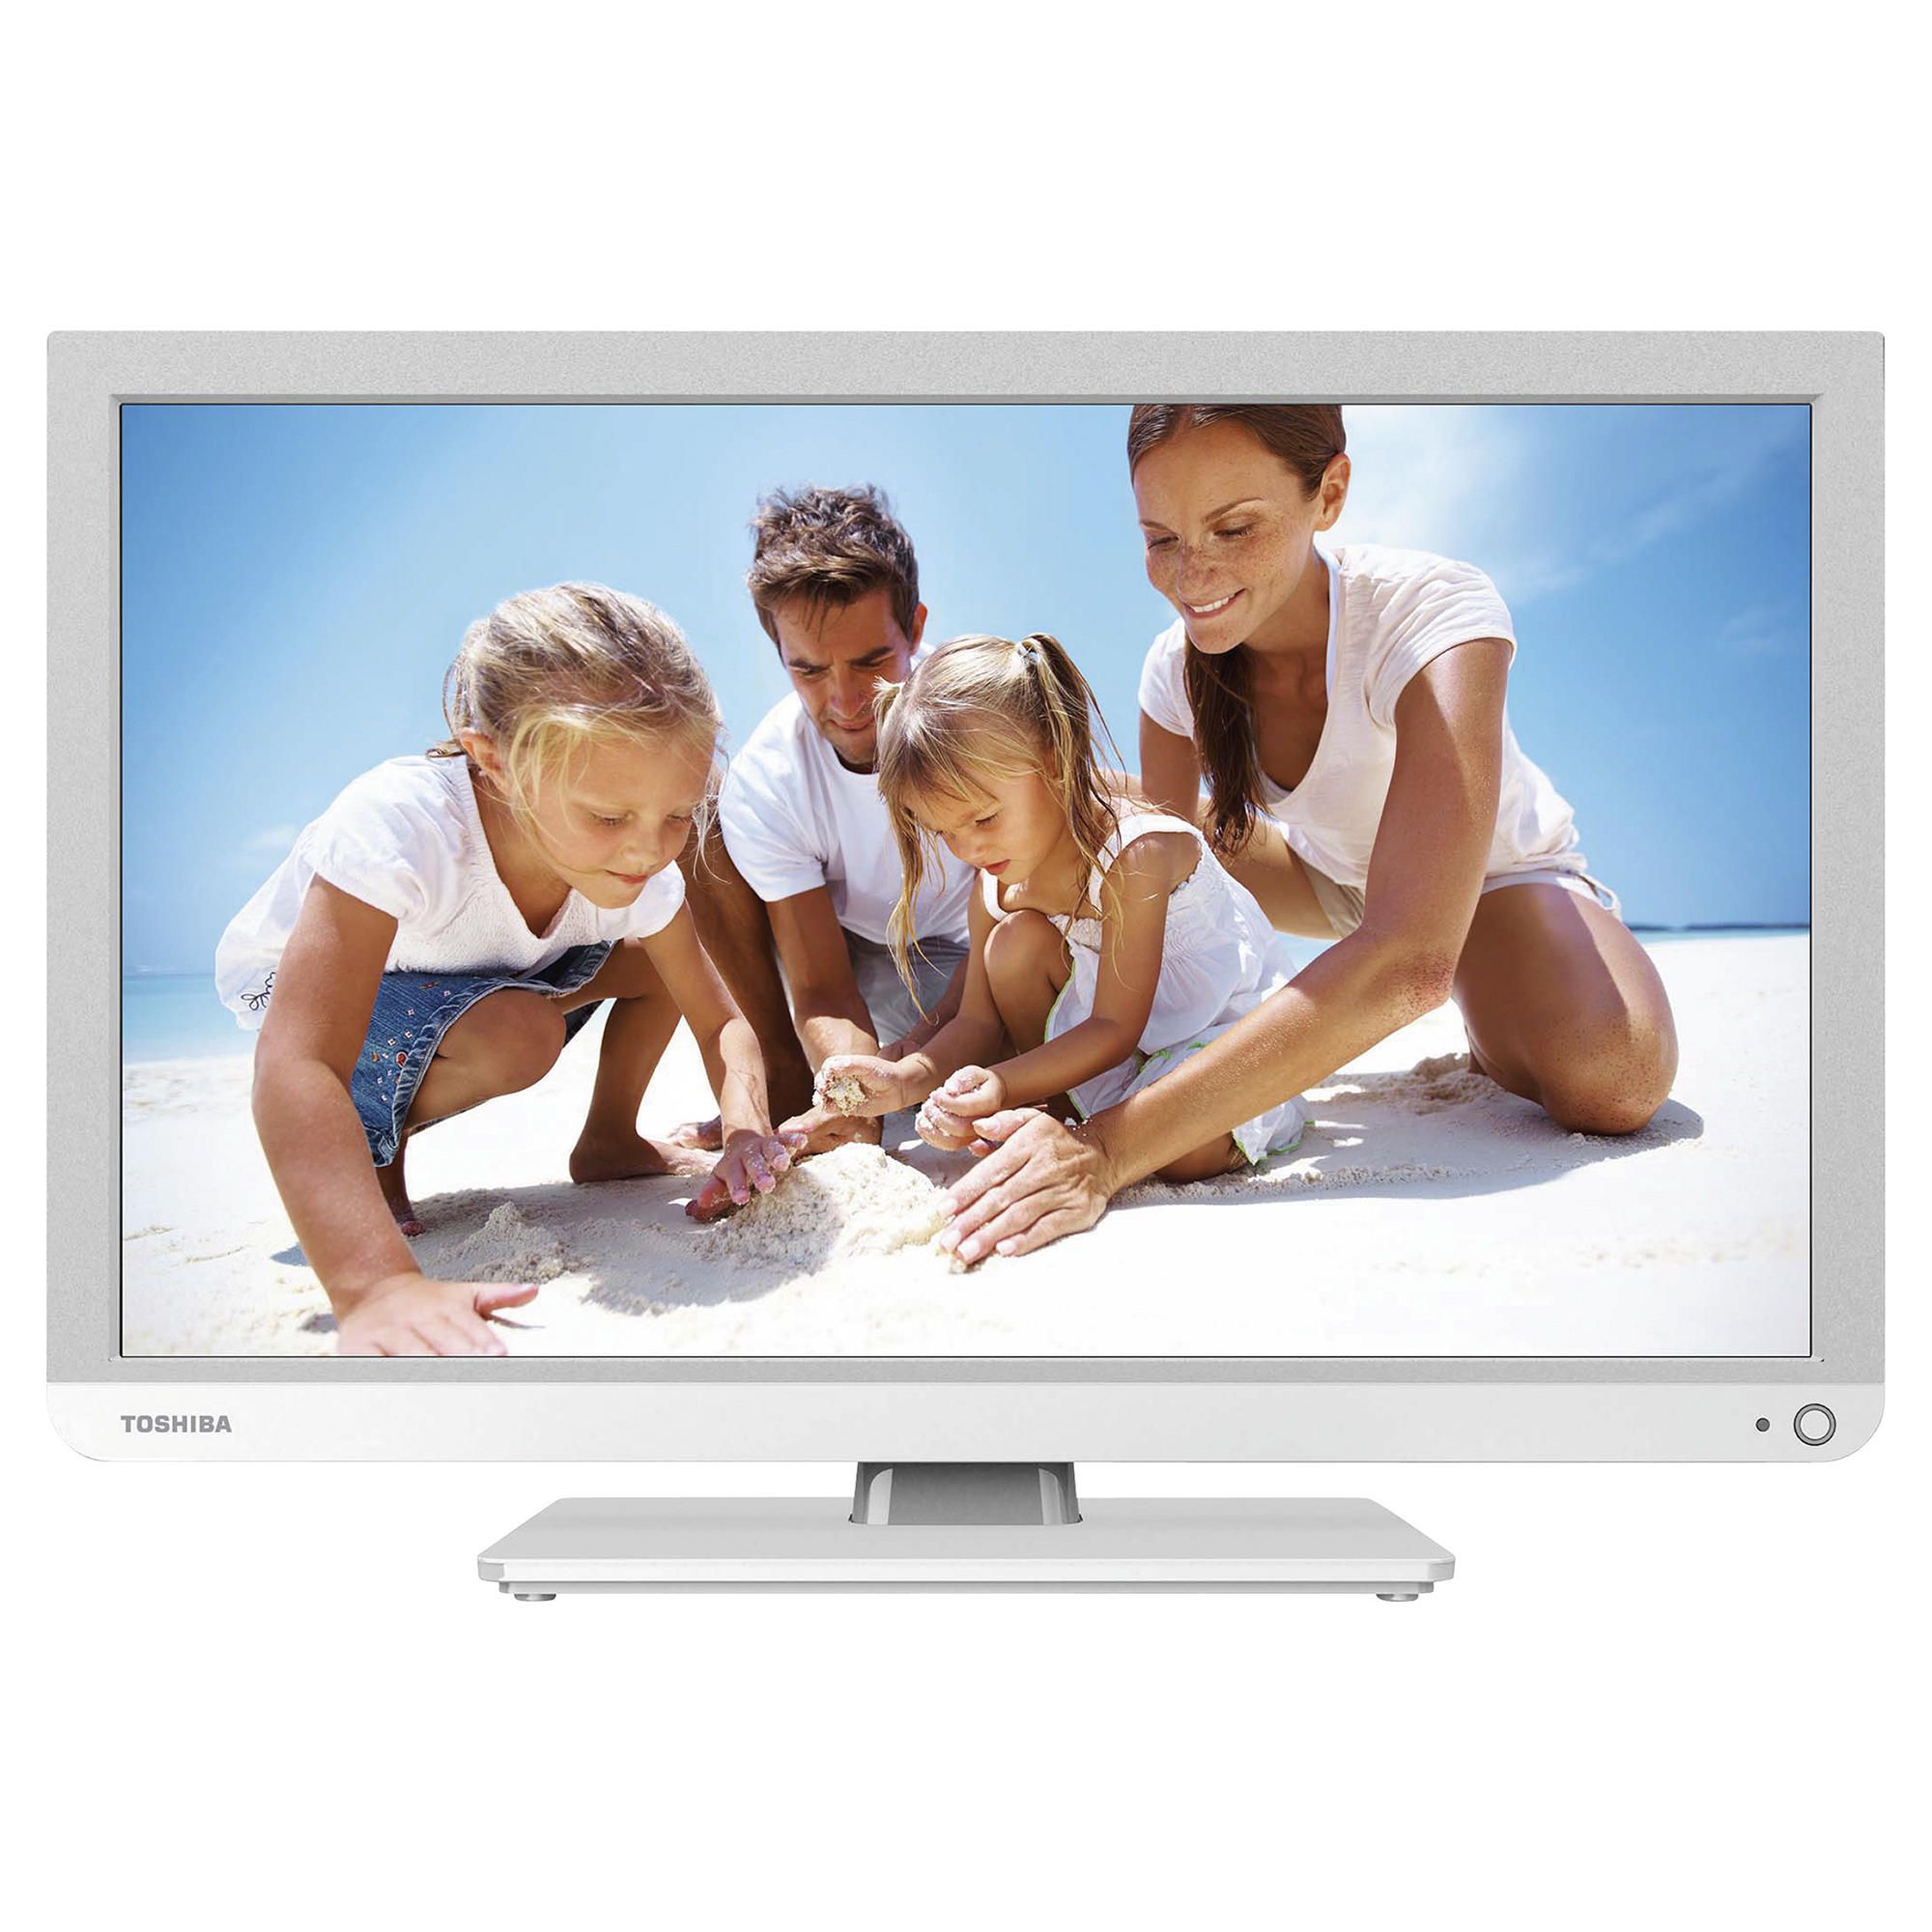 Toshiba 24D1334B 24 Inch HD Ready 720p LED TV/DVD Combi with Freeview